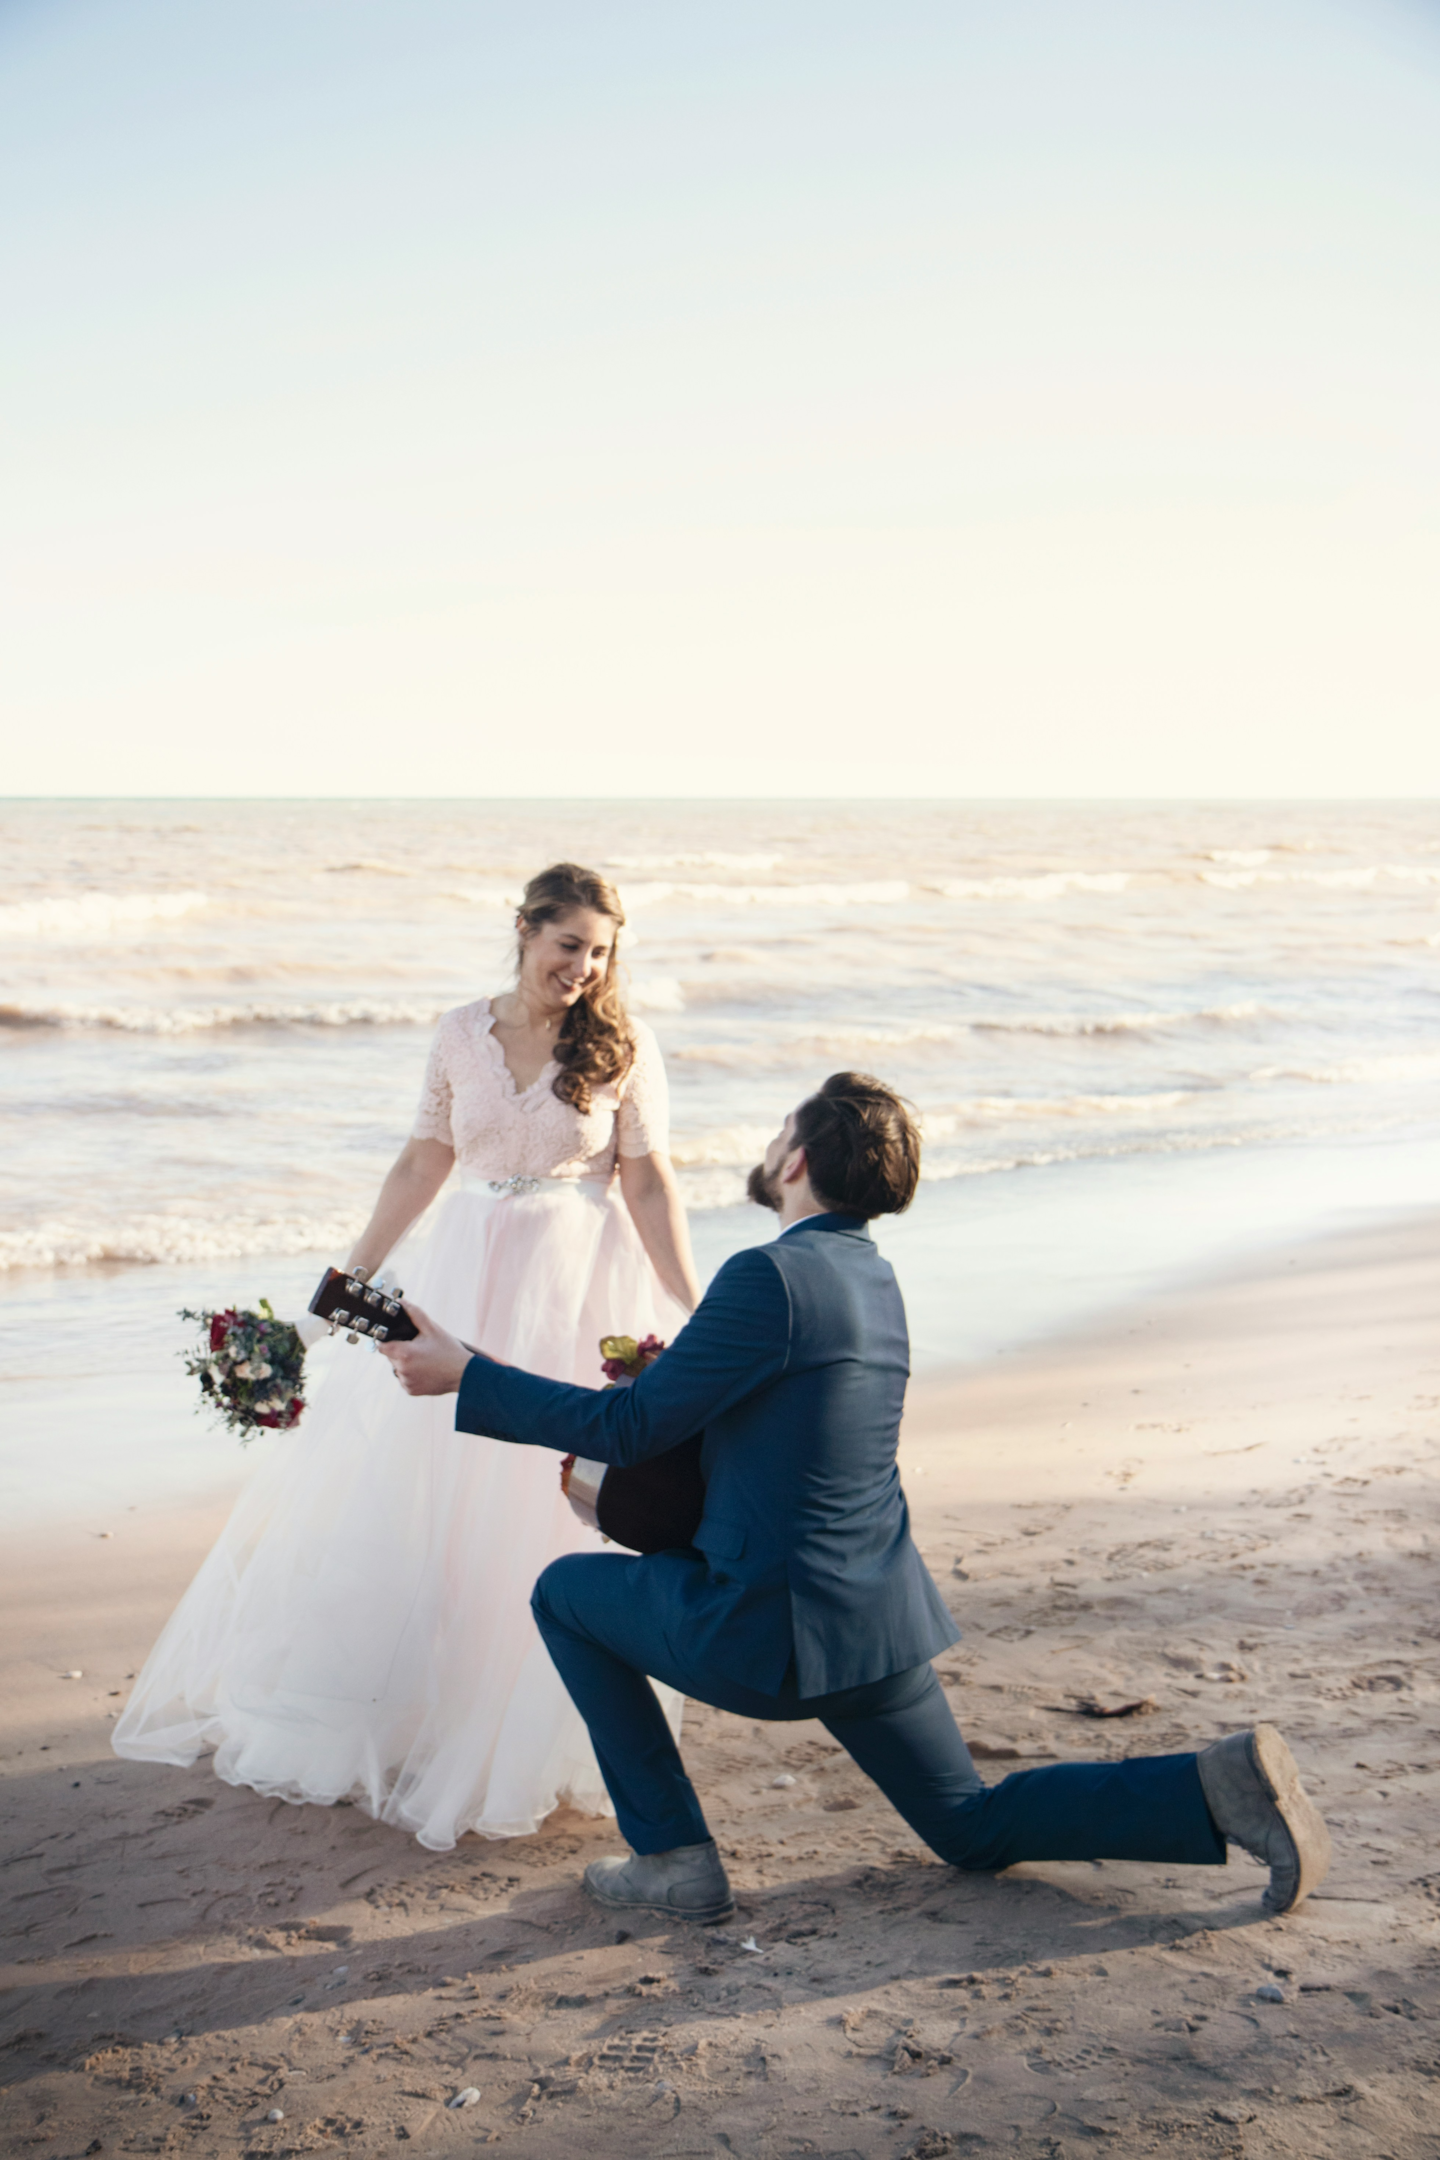 https://unsplash.com/photos/man-kneeling-on-seashore-and-playing-guitar-in-front-of-woman-at-daytime-8OAaIV_L2Q0